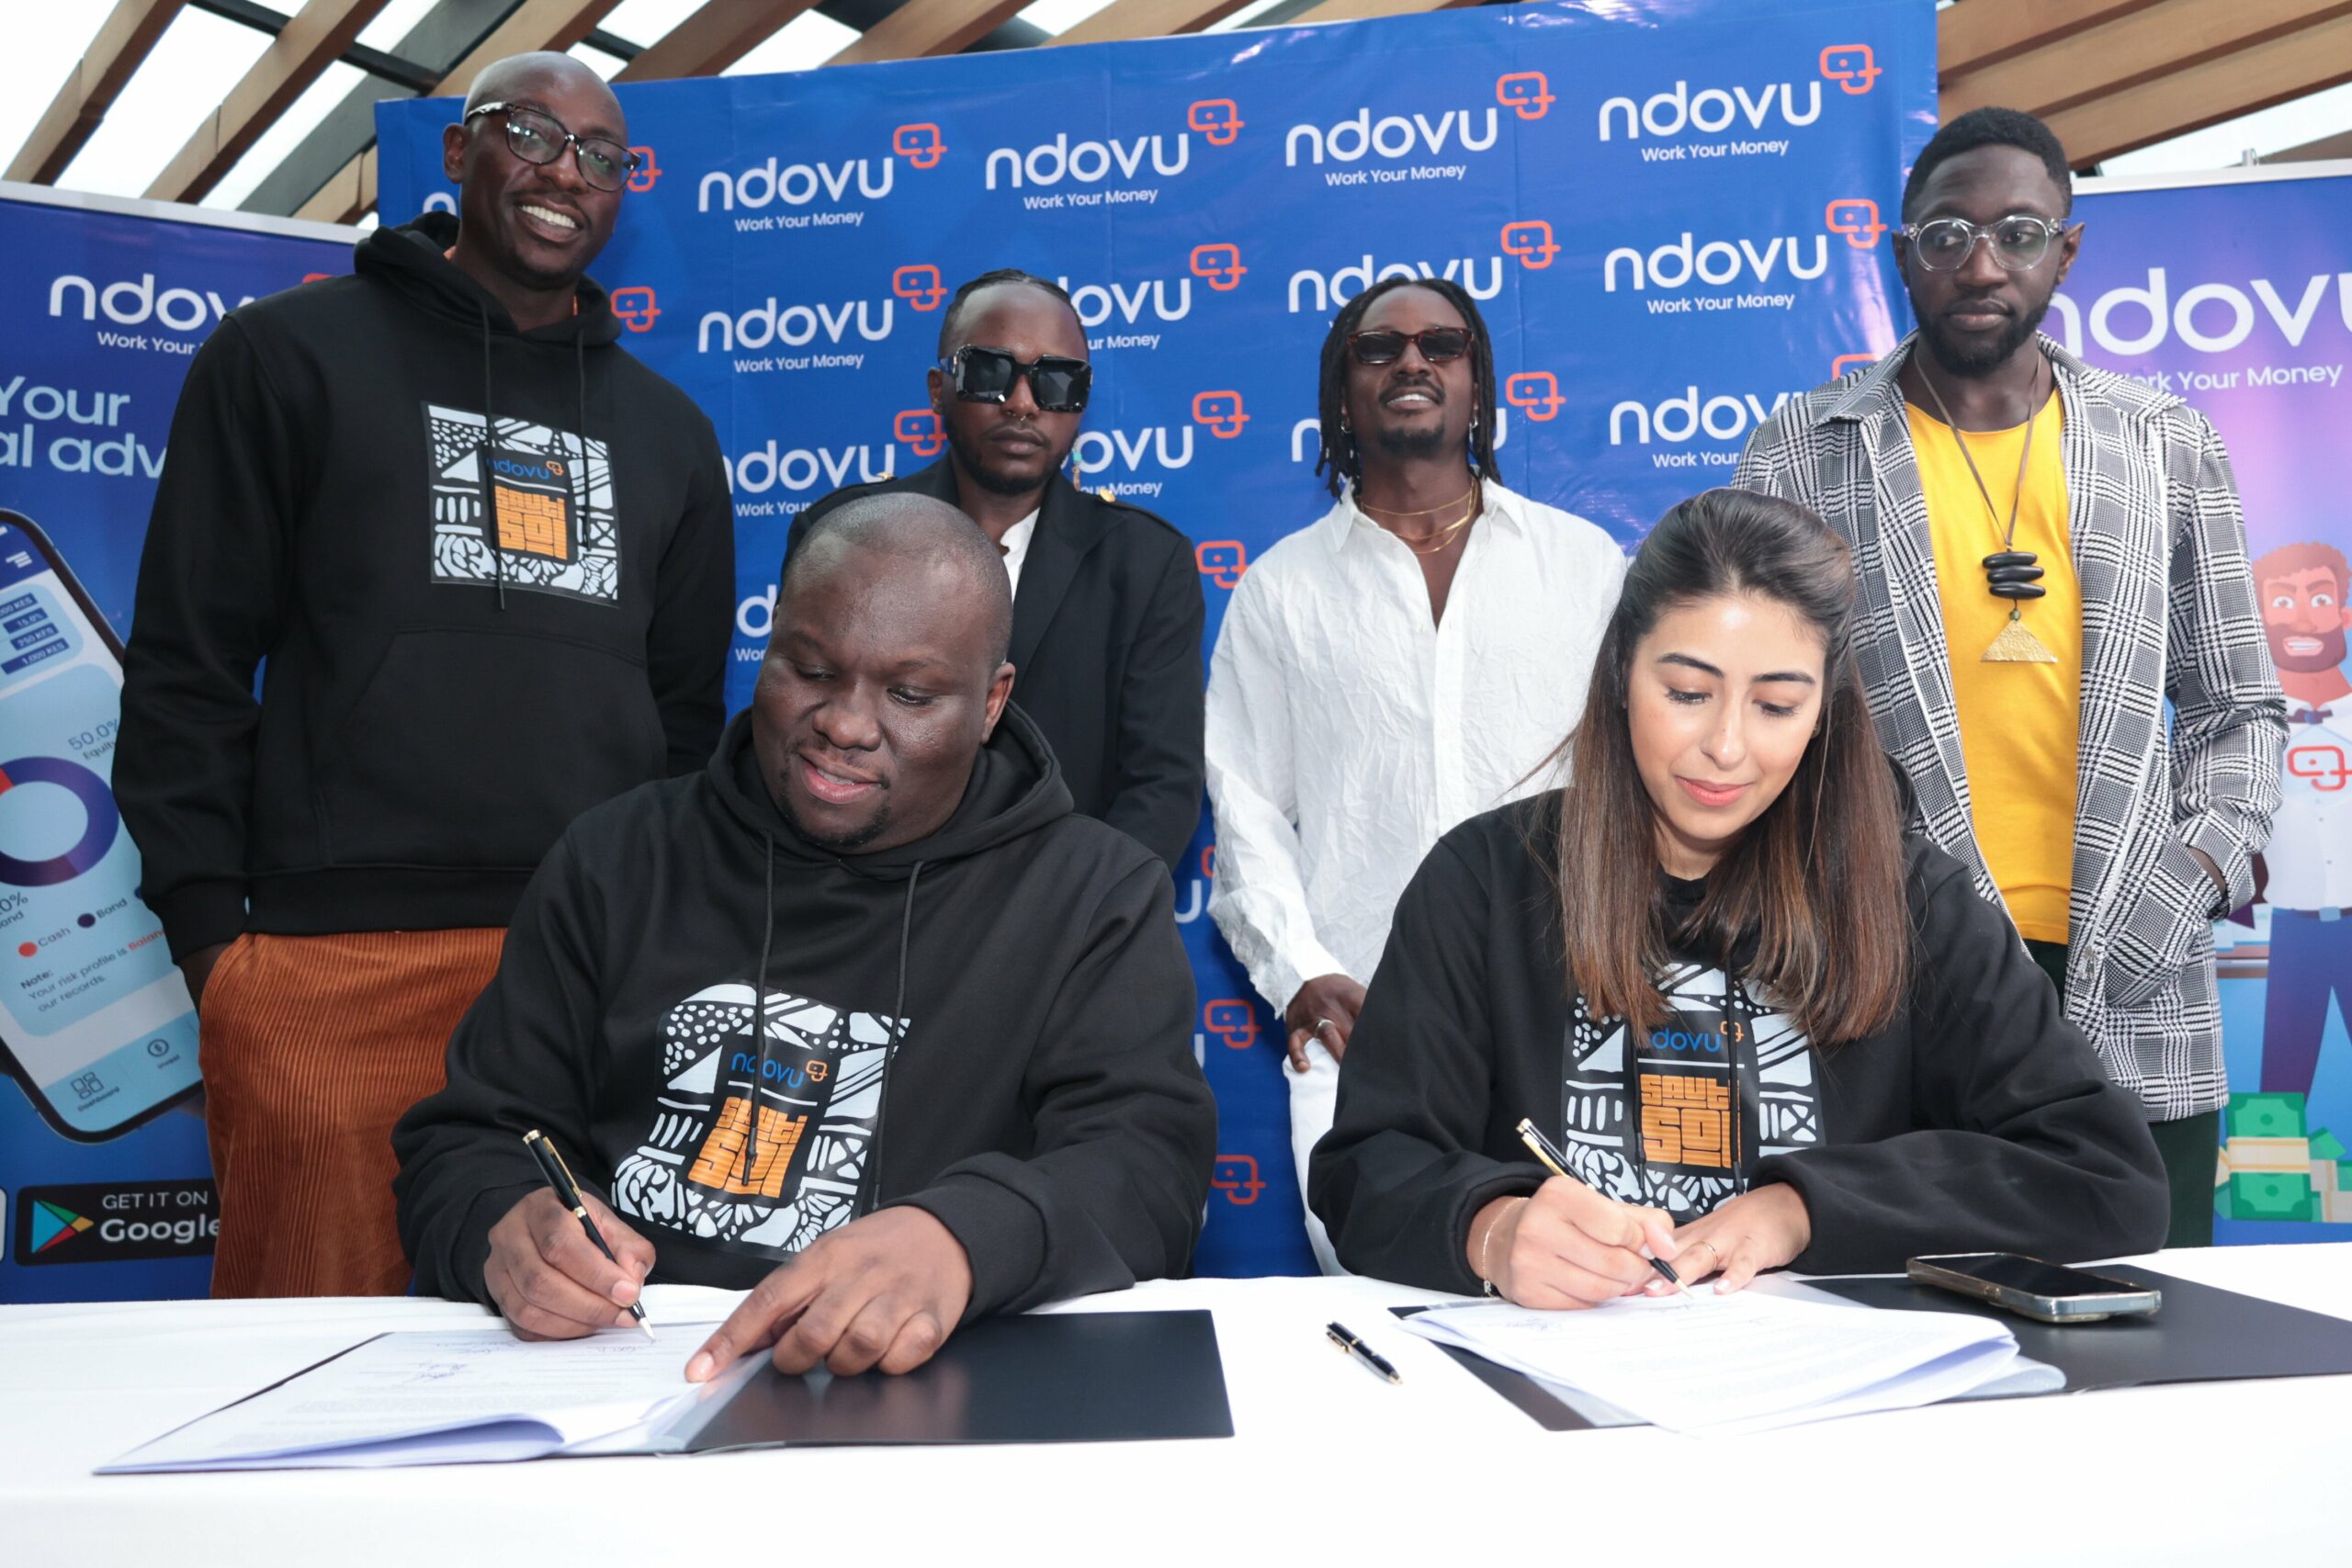 The Sauti Sol and Ndovu team putting pen to paper on their partnership to promote financial literacy and drive financial inclusion in Africa.